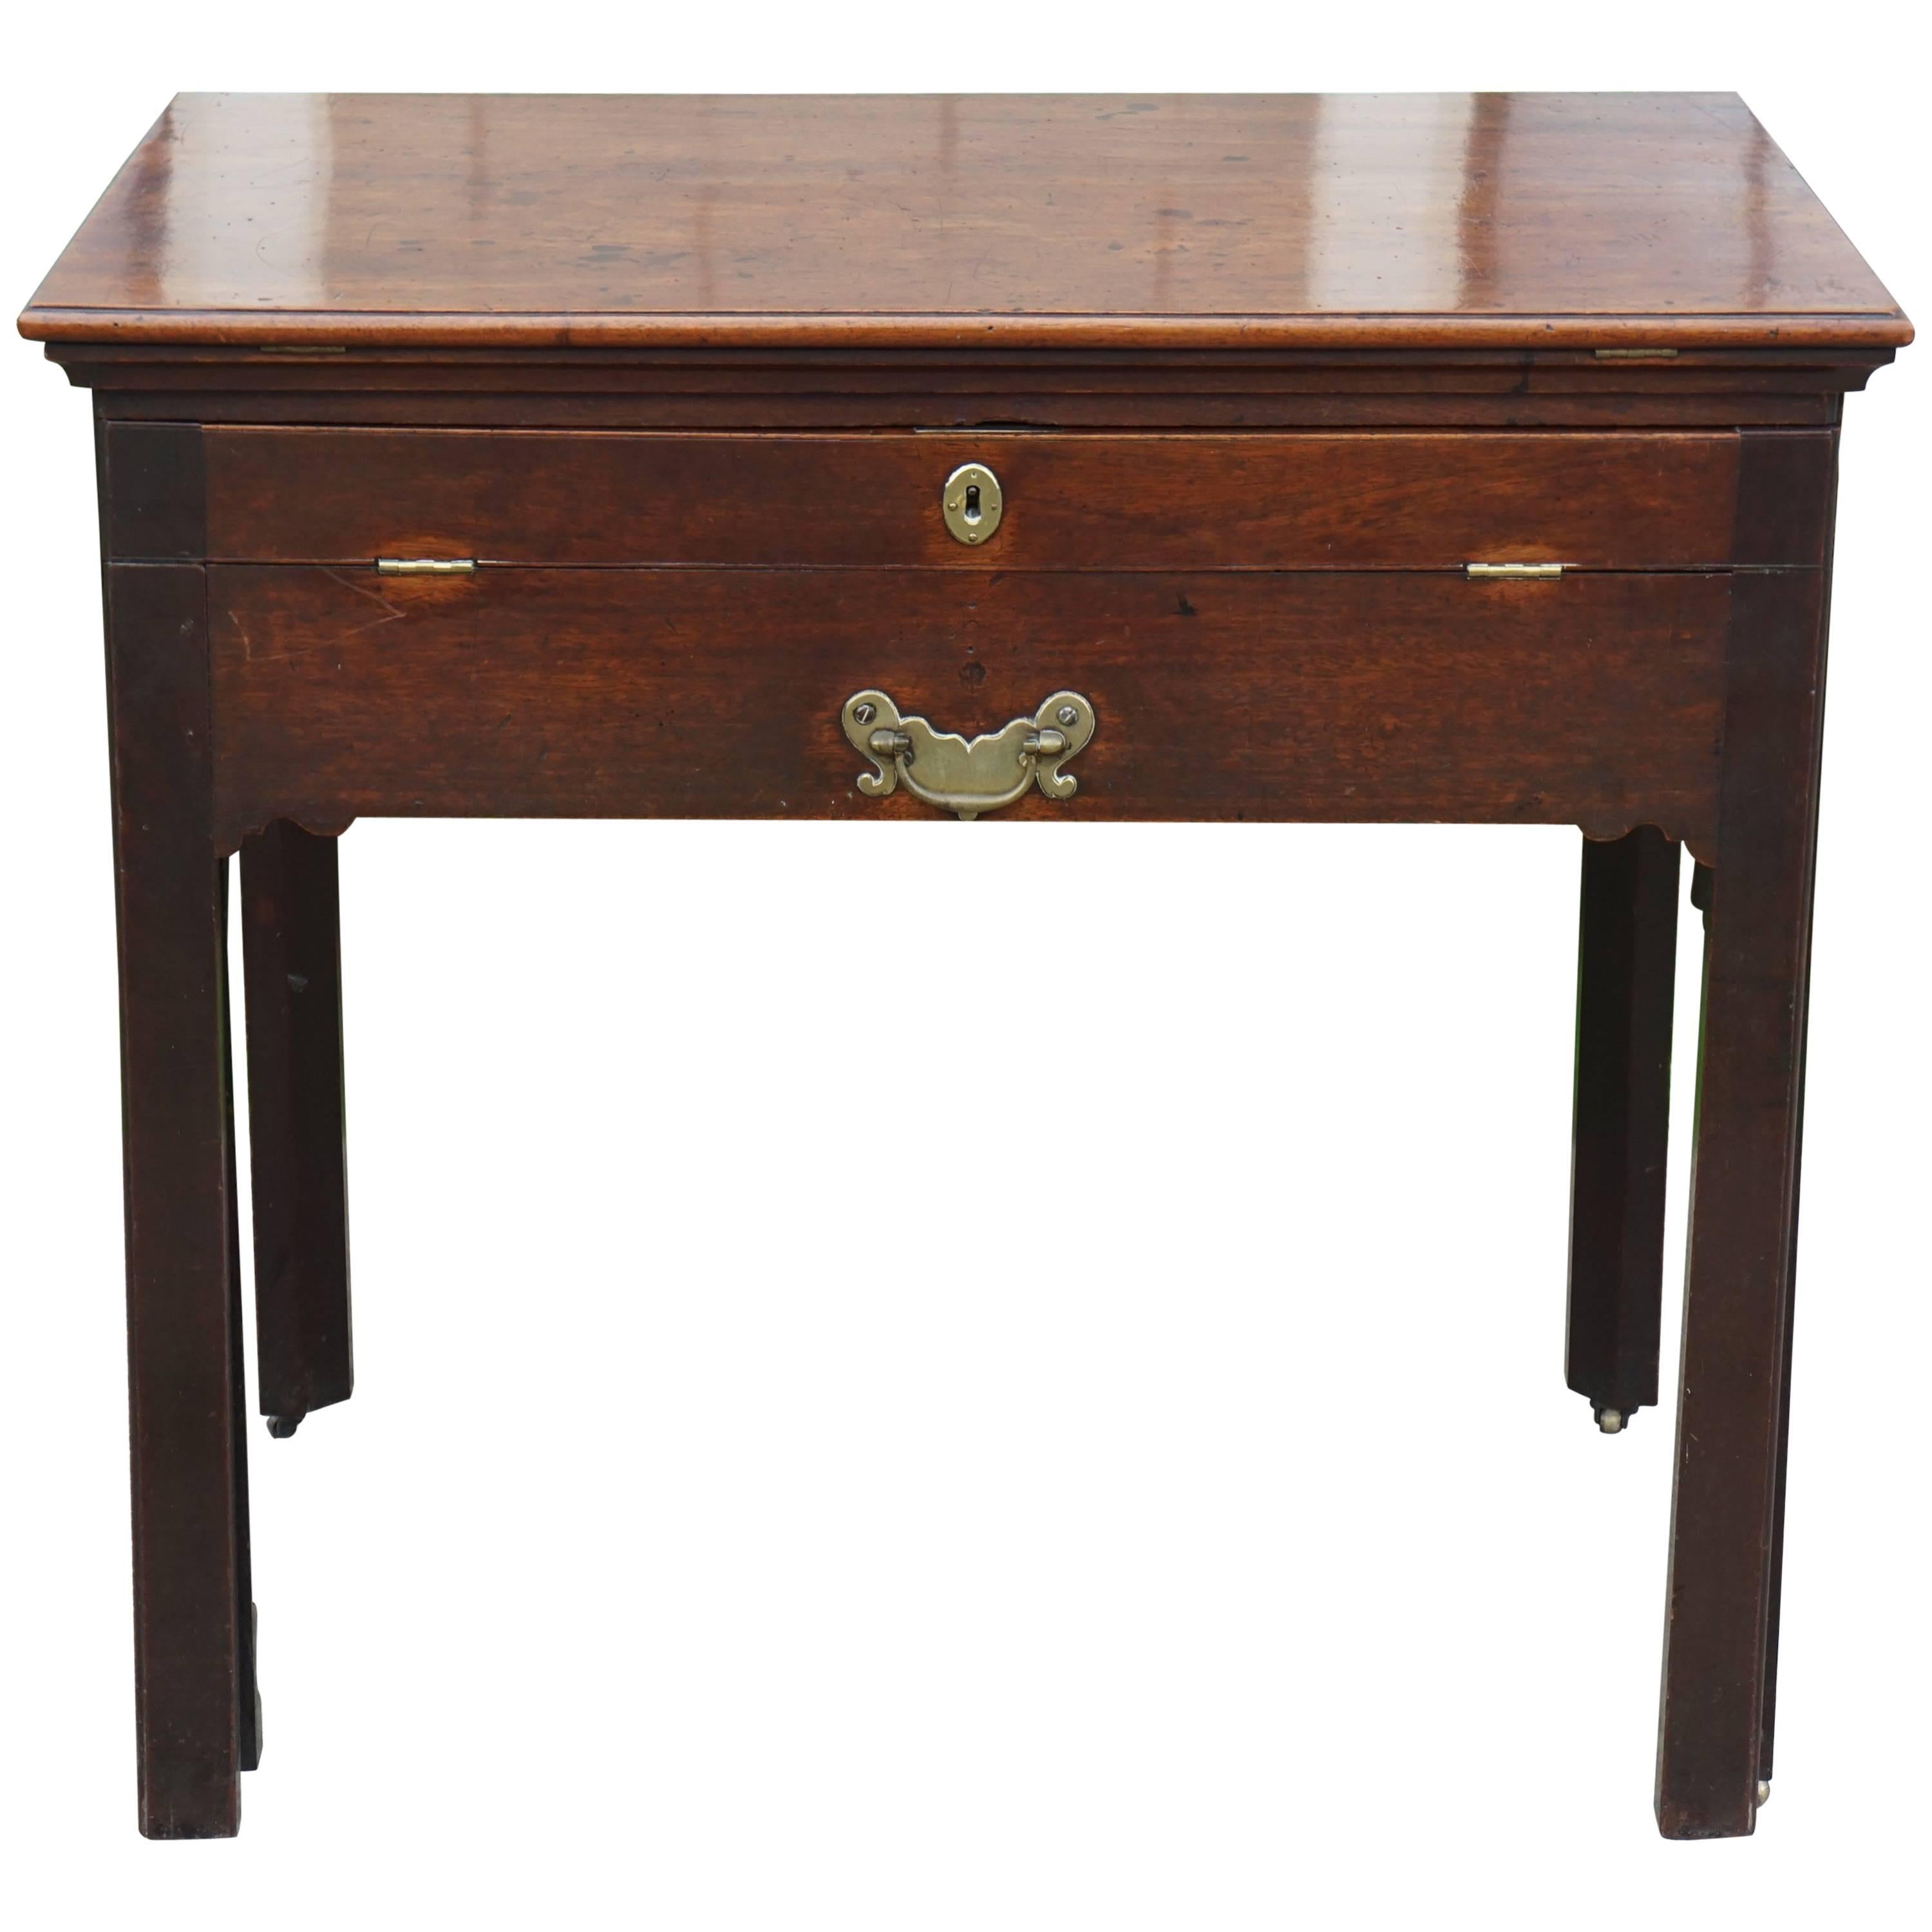 Period Early George III Mahogany Architects Work Table For Sale